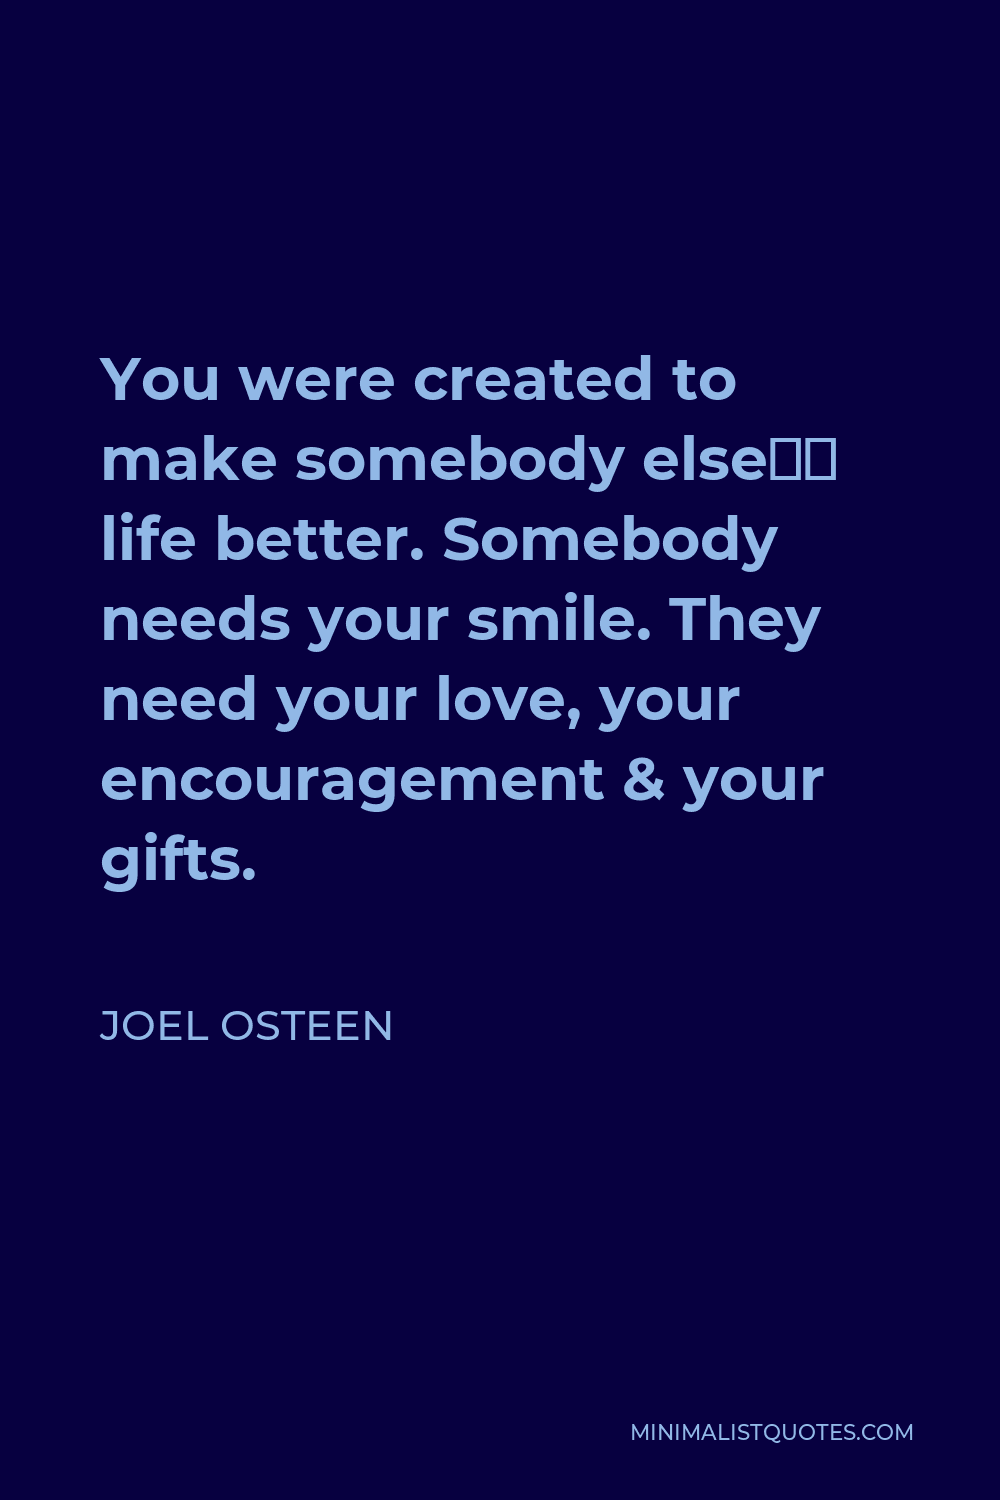 Joel Osteen Quote: You were created to make somebody else's life better.  Somebody needs your smile. They need your love, your encouragement & your  gifts.